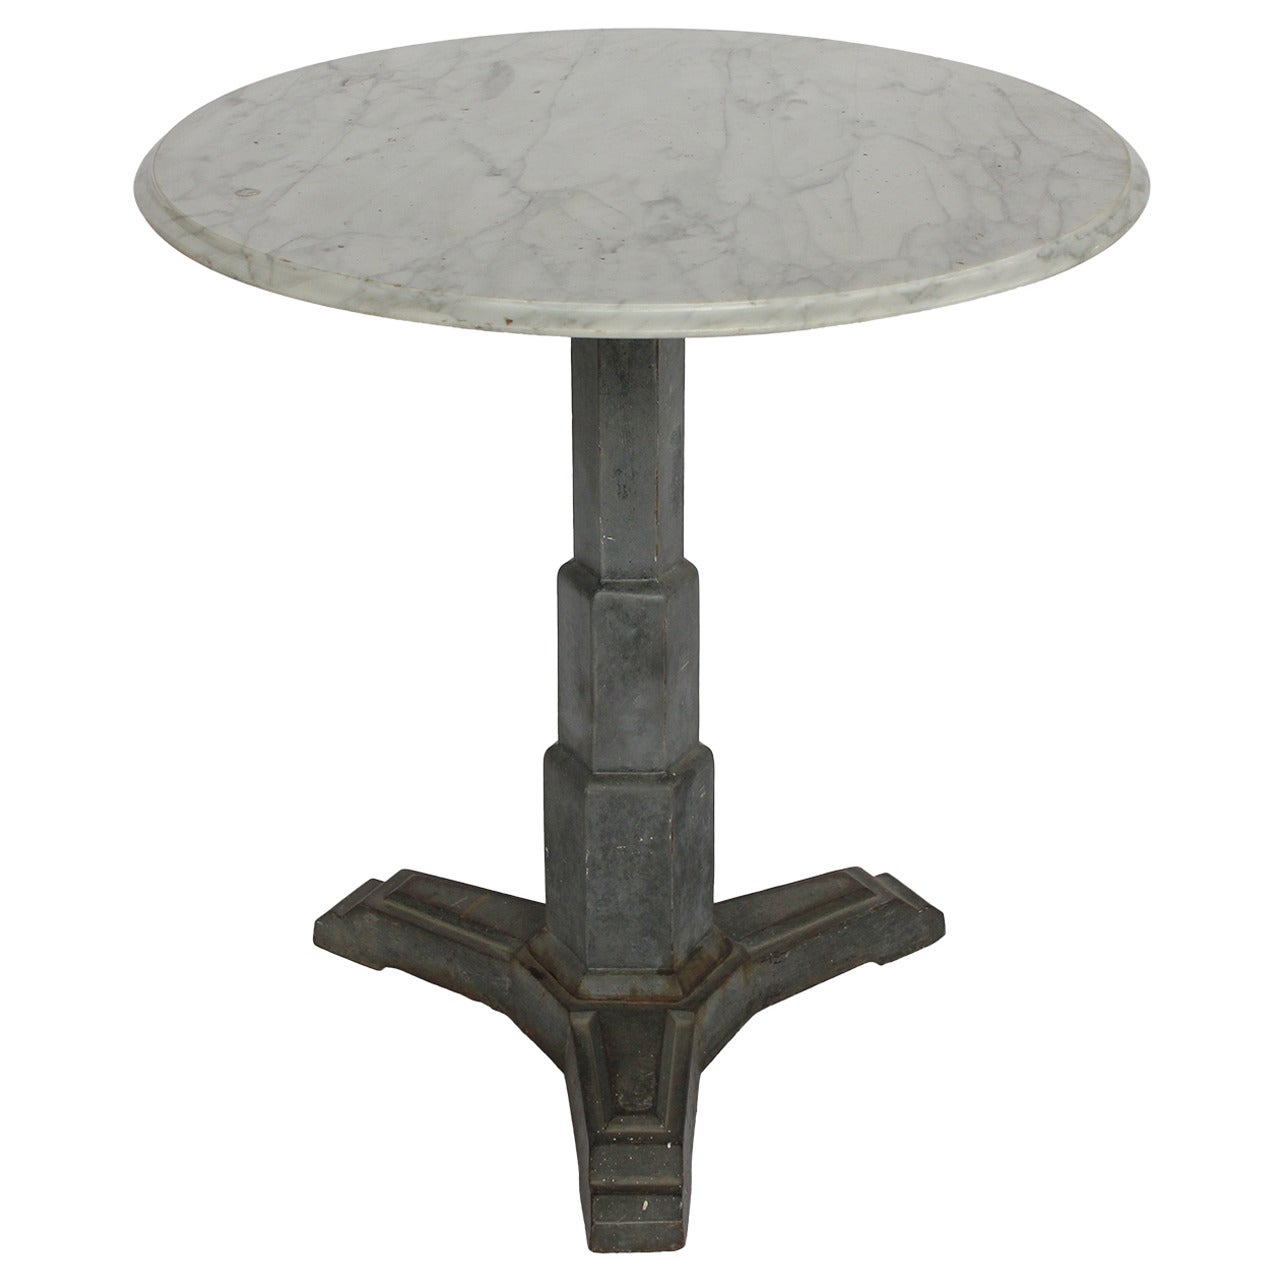 Antique American Industrial Table